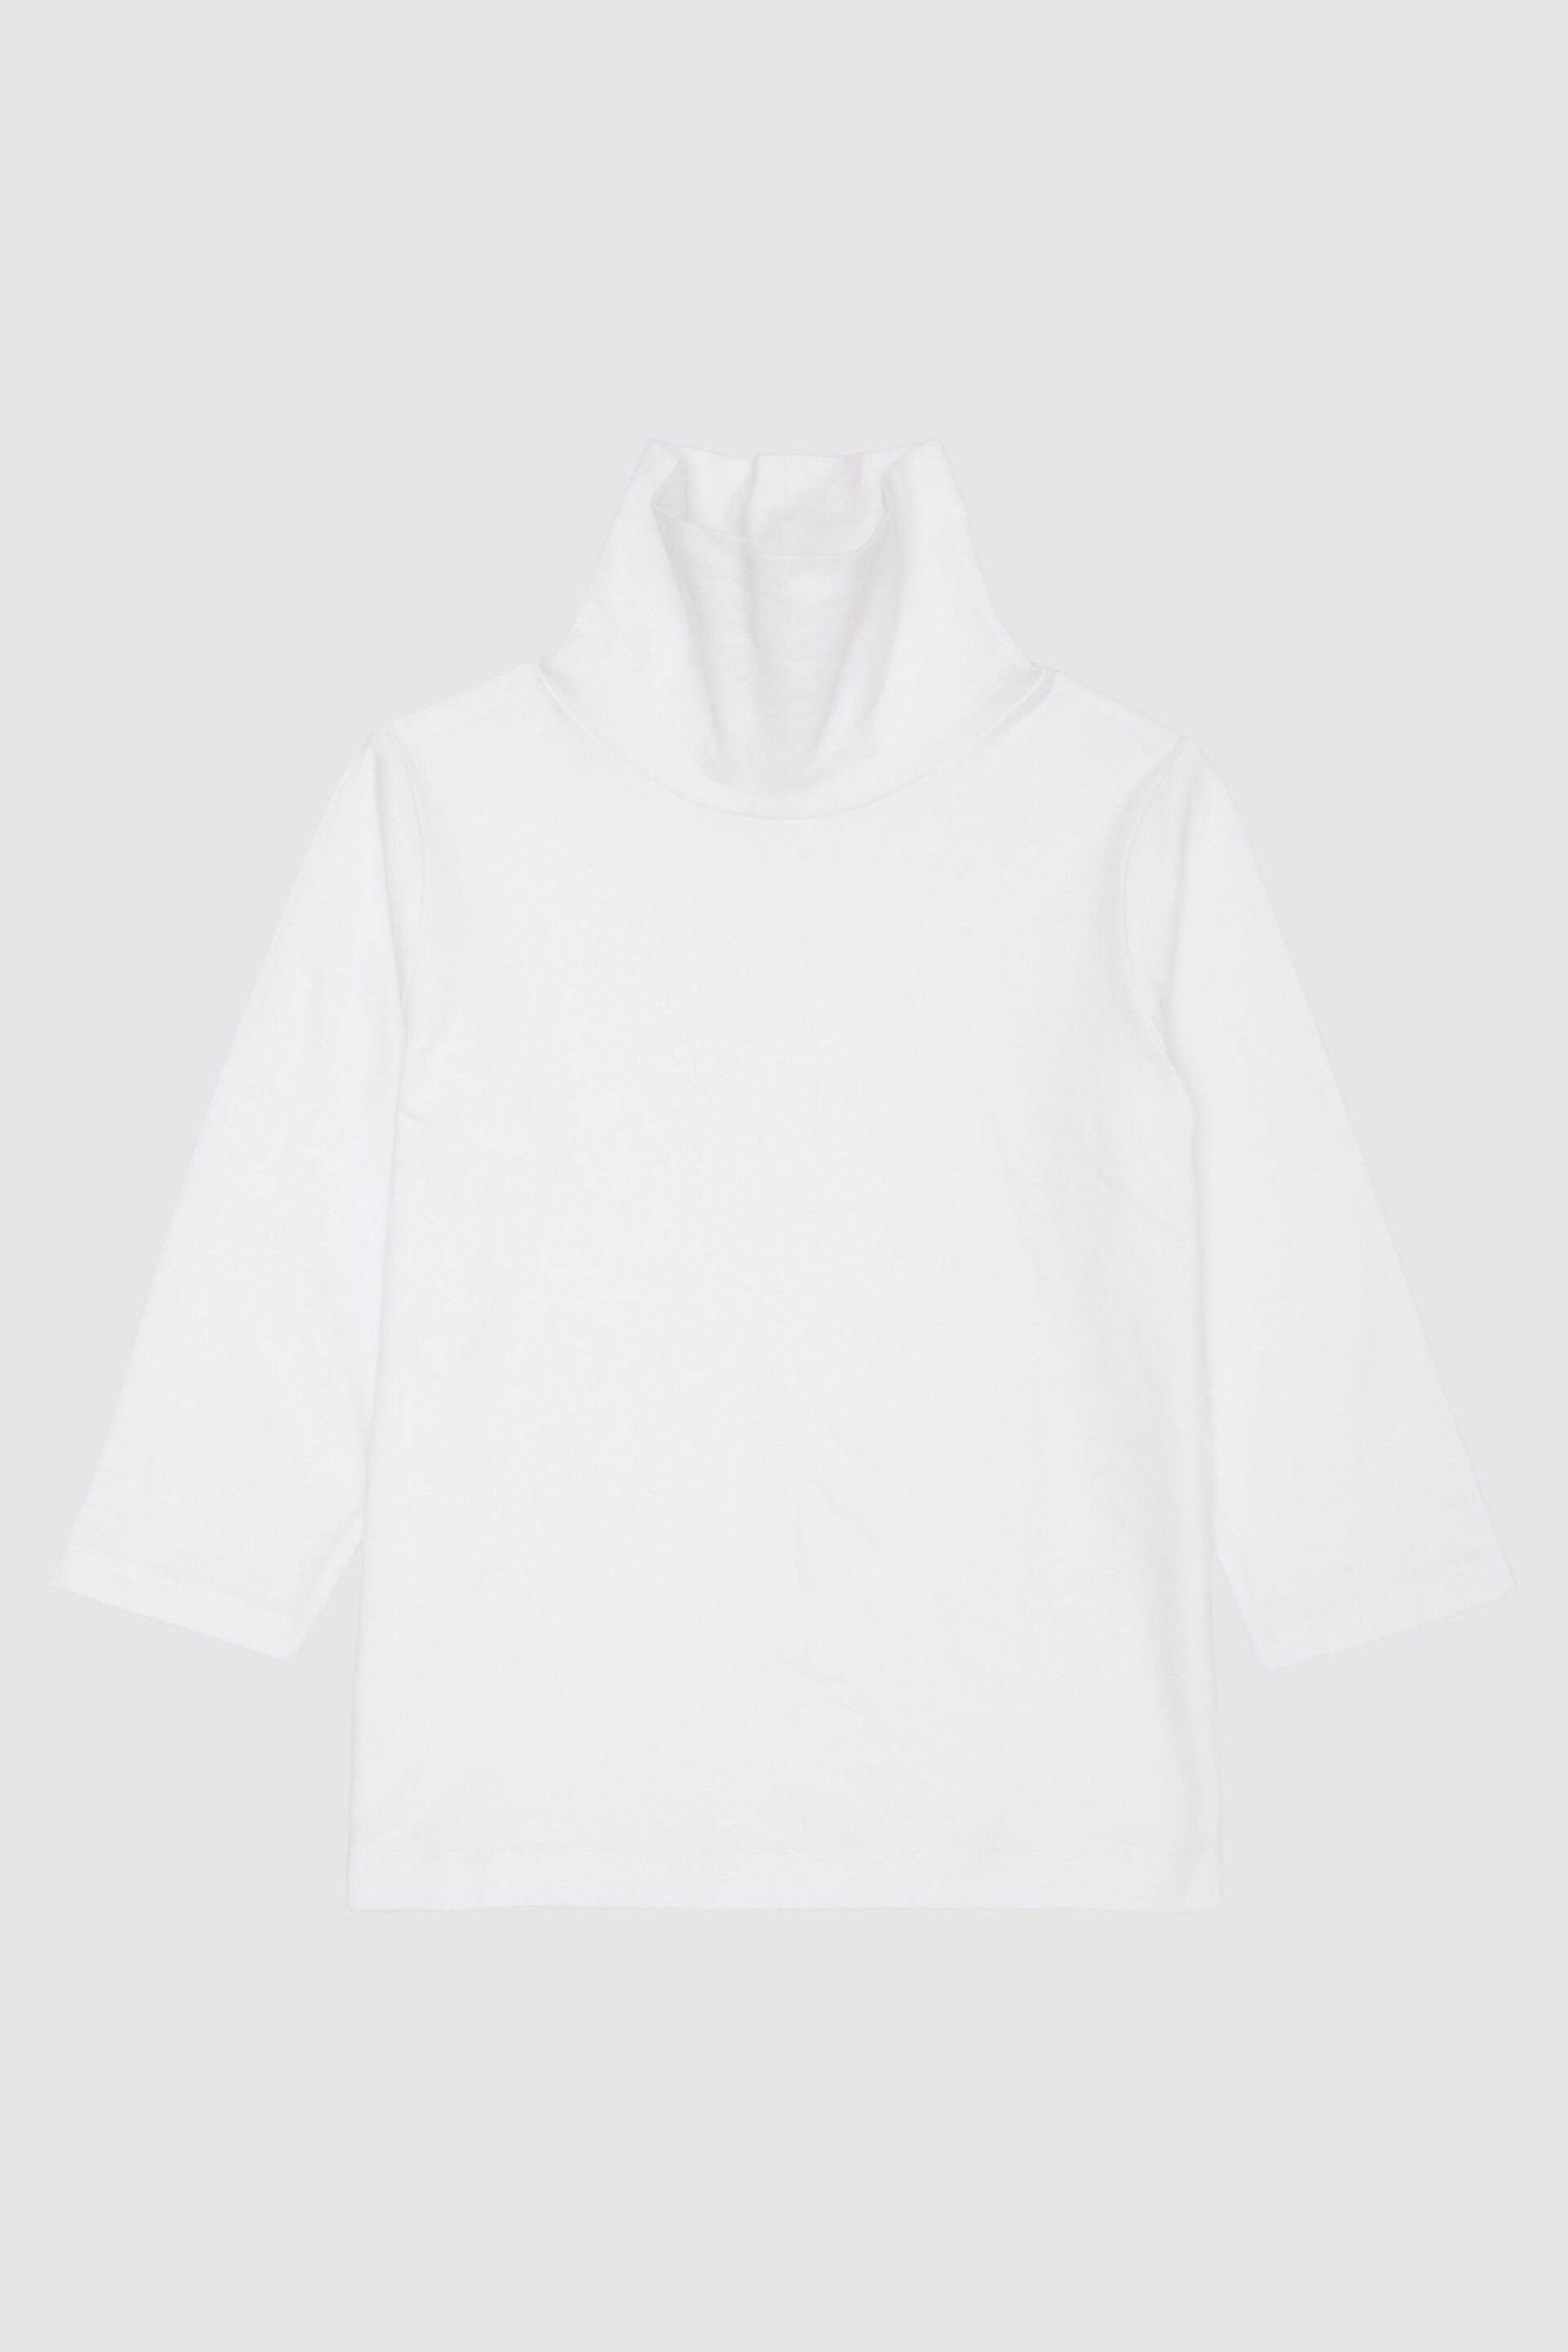 Reiss Ivory Carey Senior Cotton Blend Roll Neck Top - Image 2 of 8